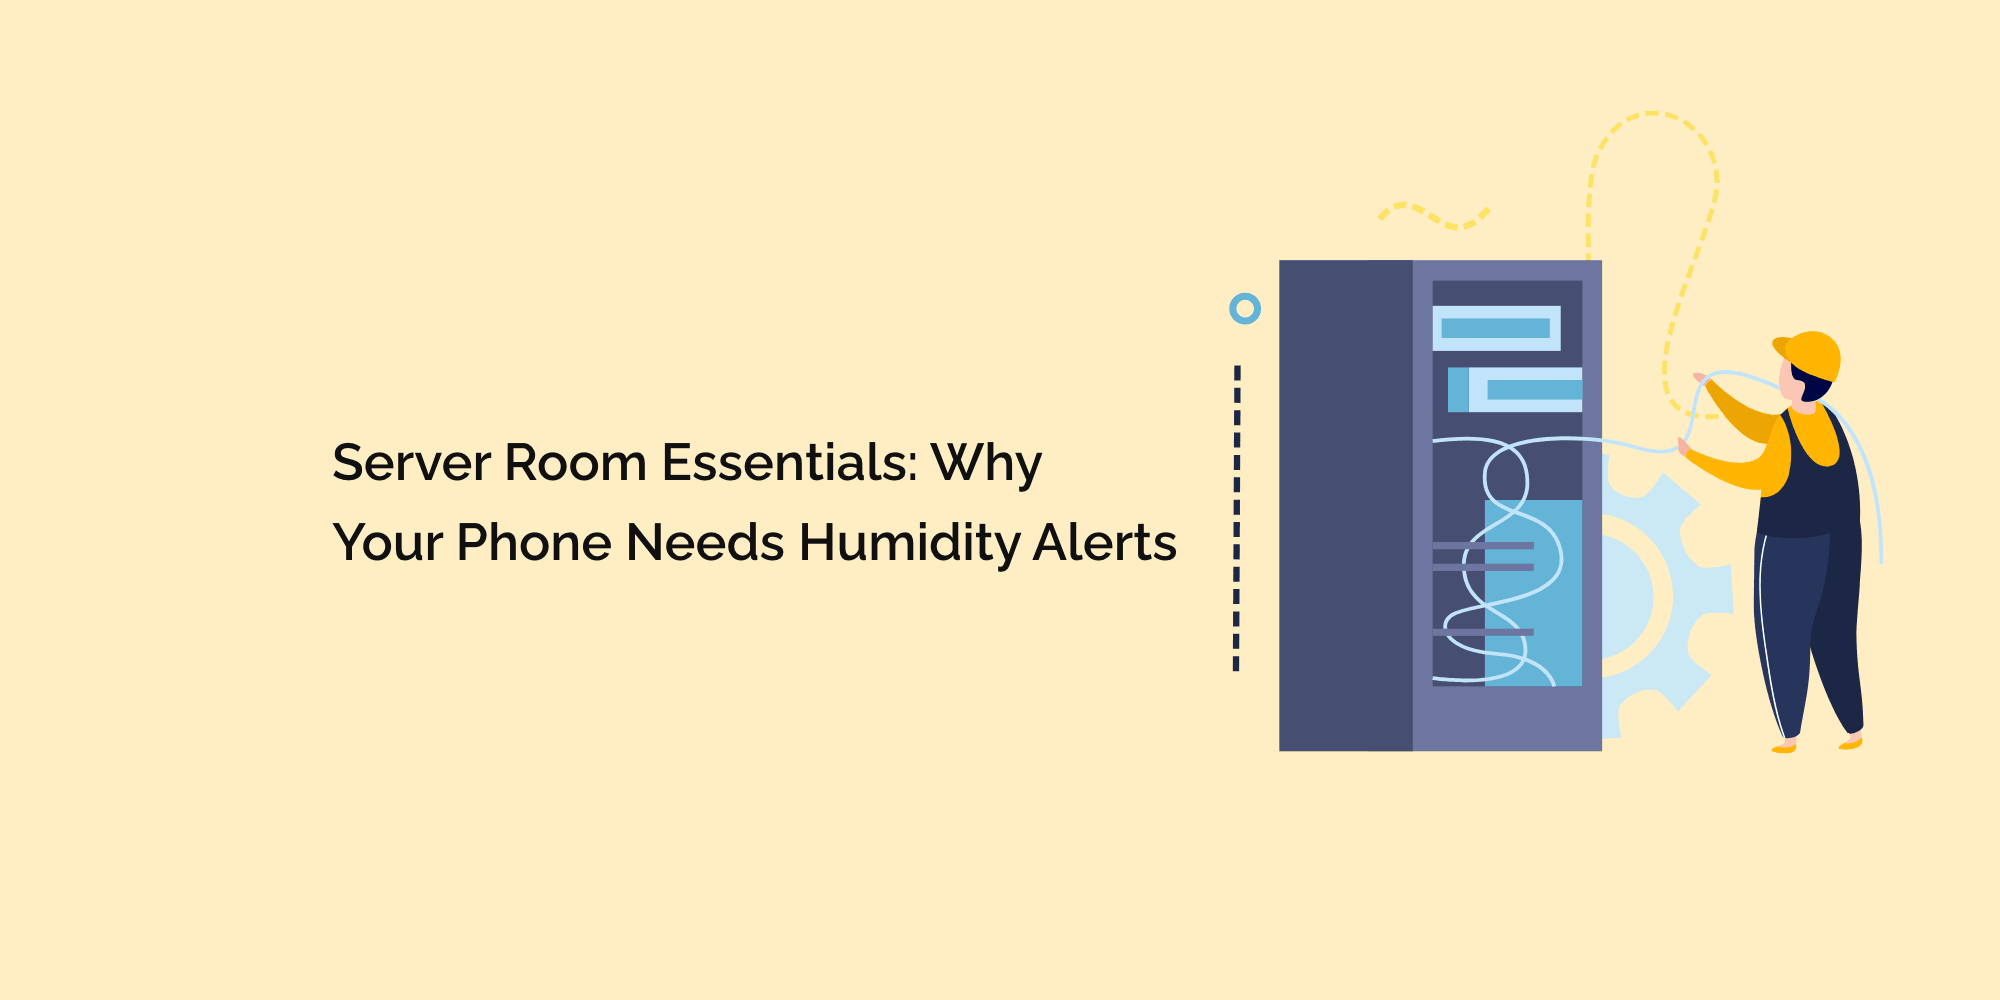 Server Room Essentials: Why Your Phone Needs Humidity Alerts